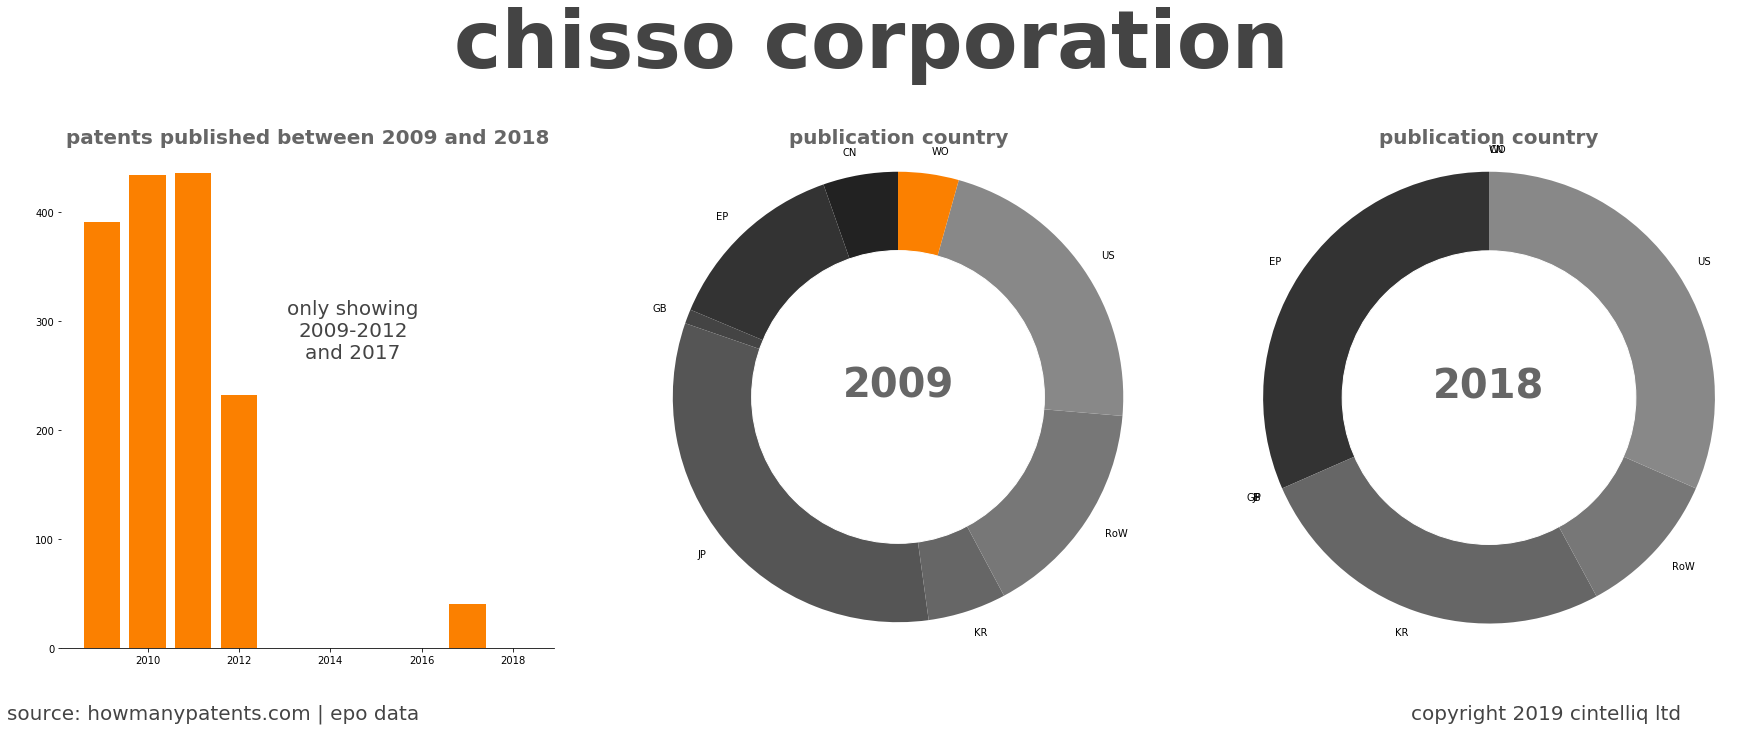 summary of patents for Chisso Corporation